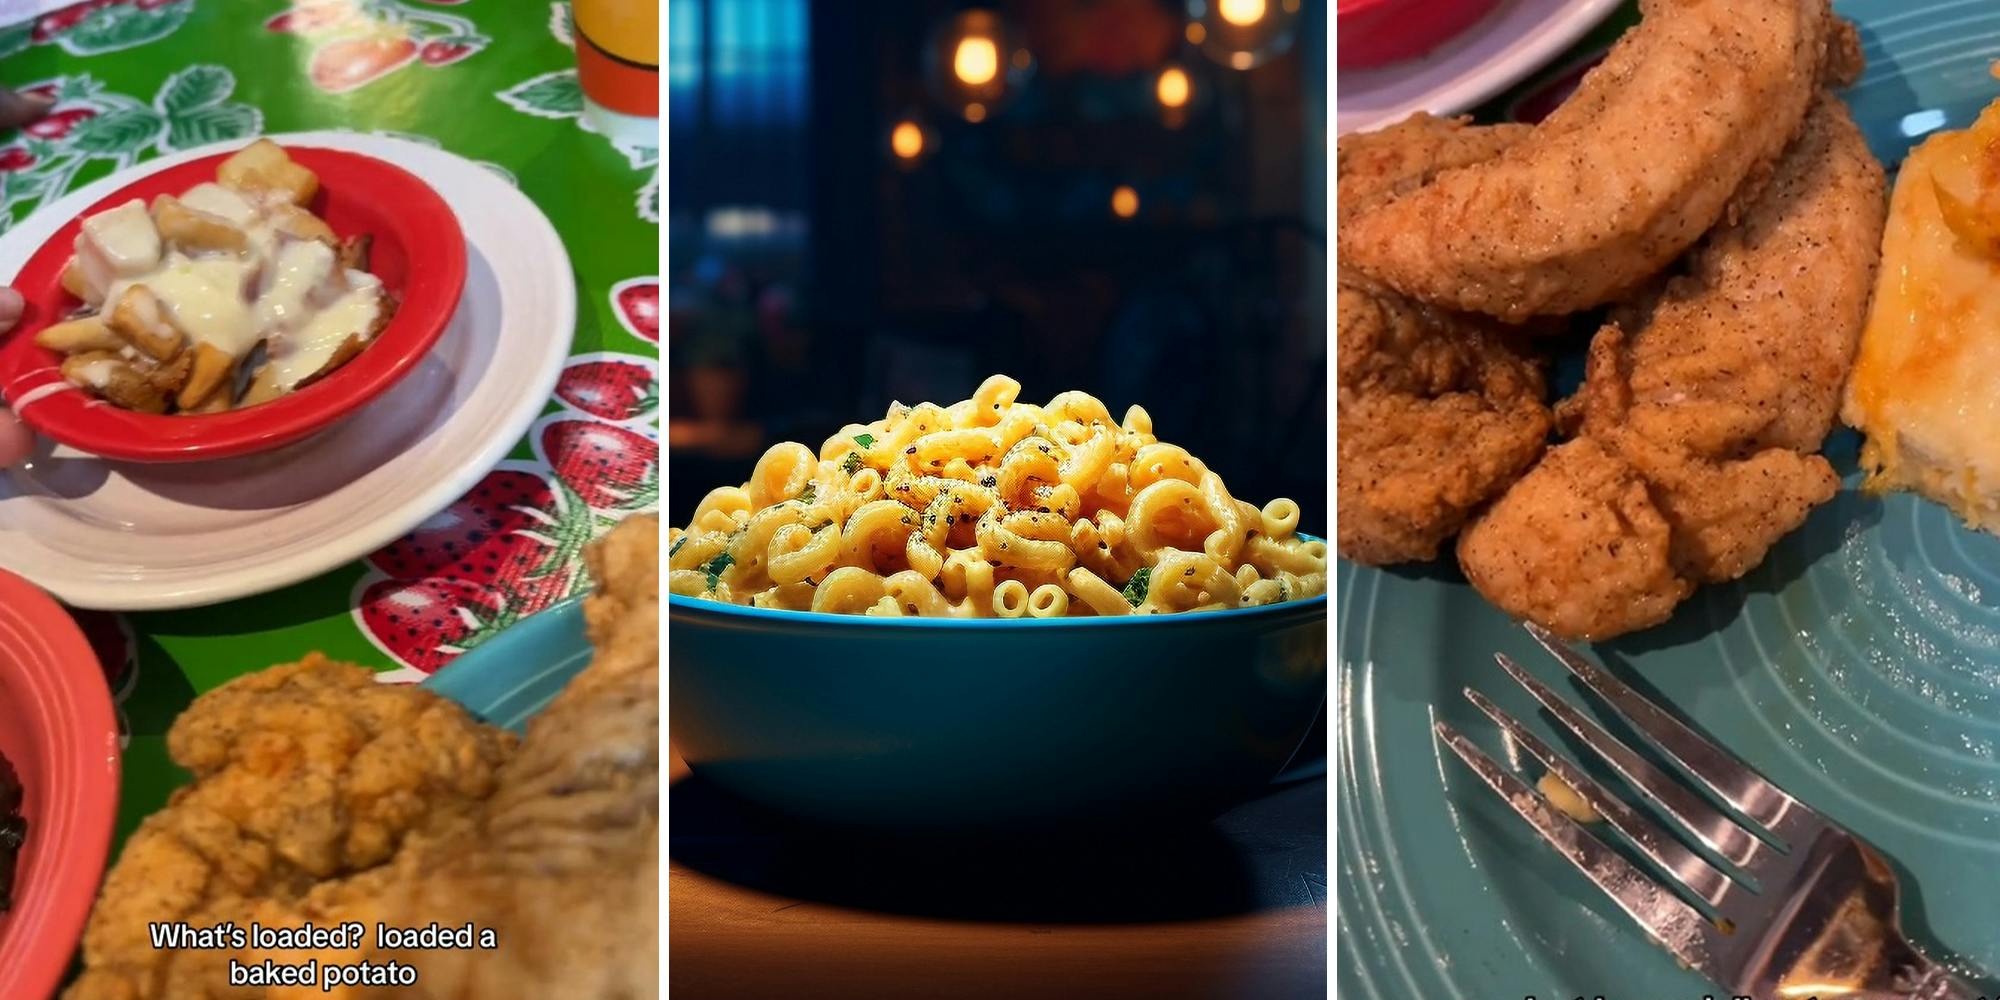 Restaurant guest orders mac and cheese and chicken tenders. She doesn't expect what she receives